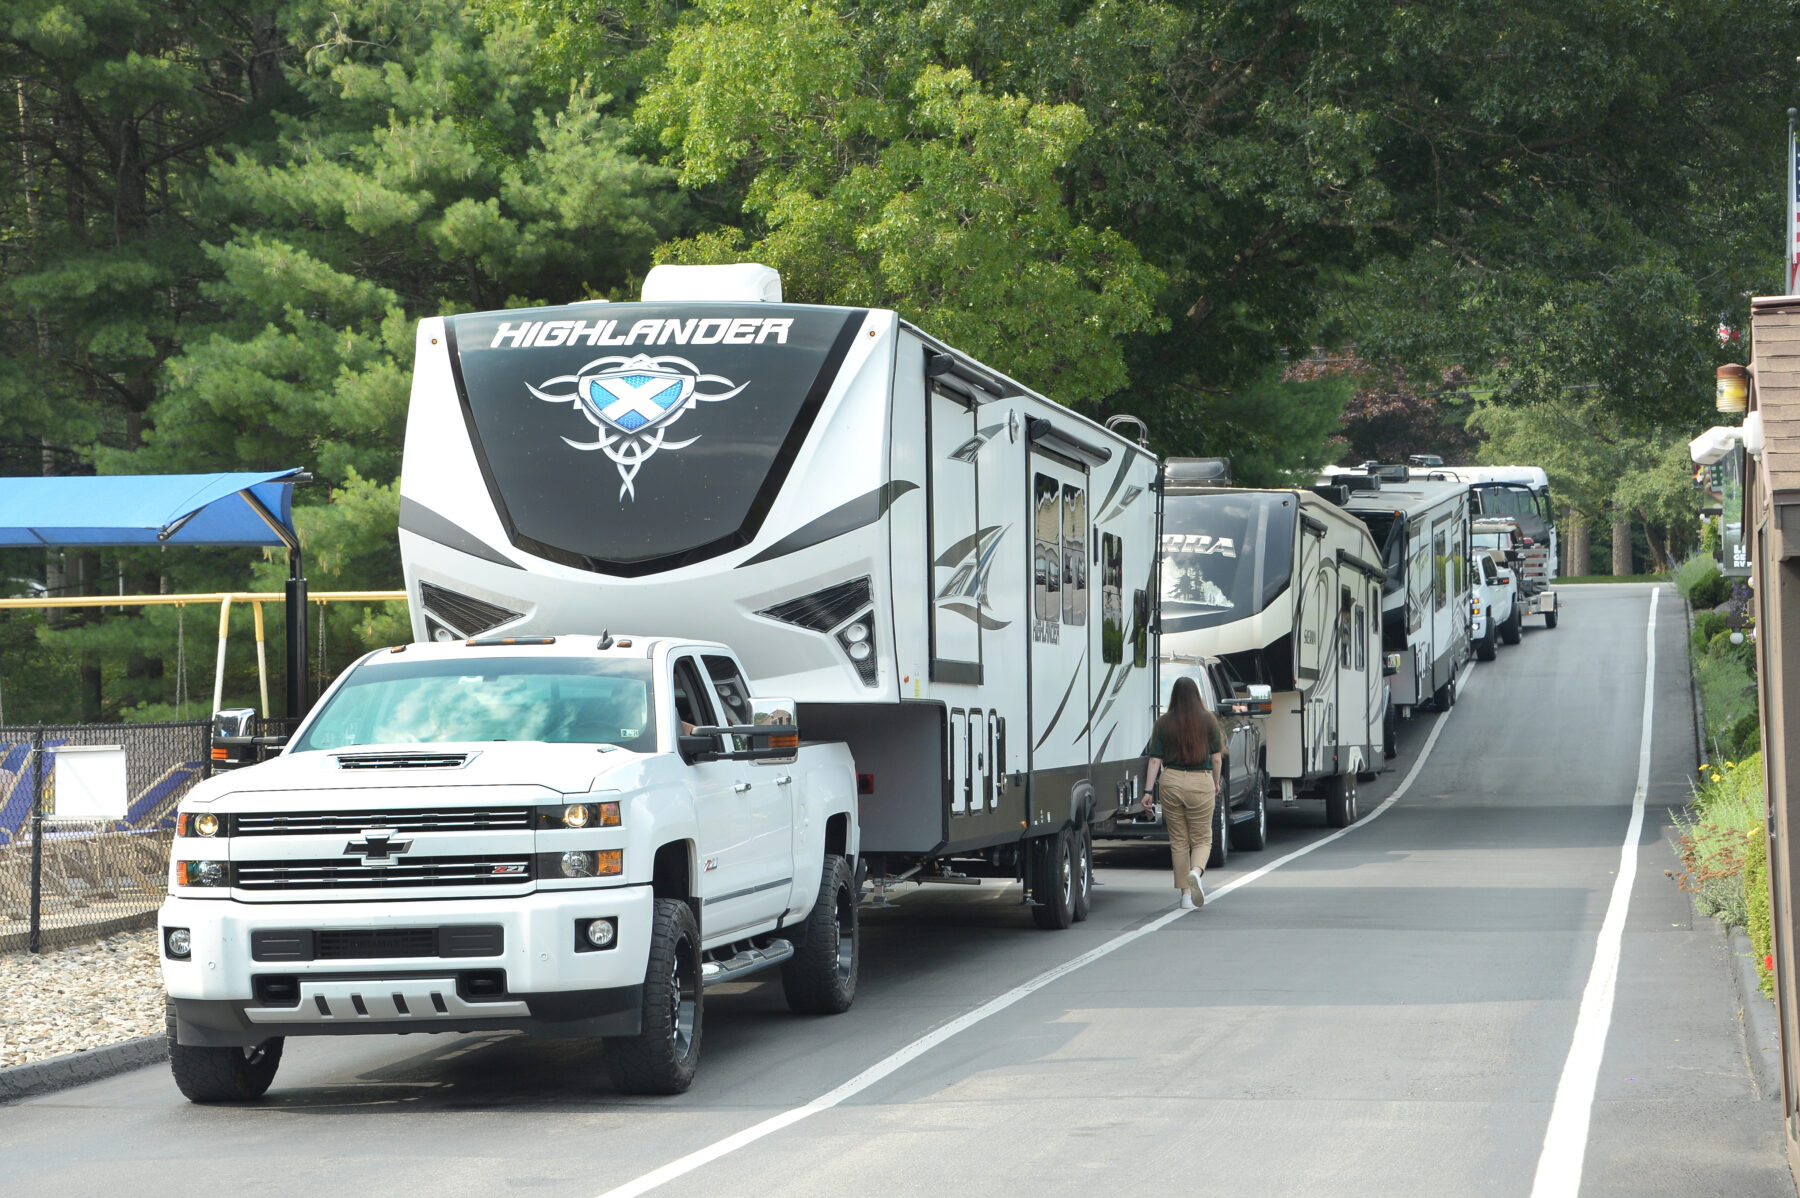 RVs lined up awaiting check in